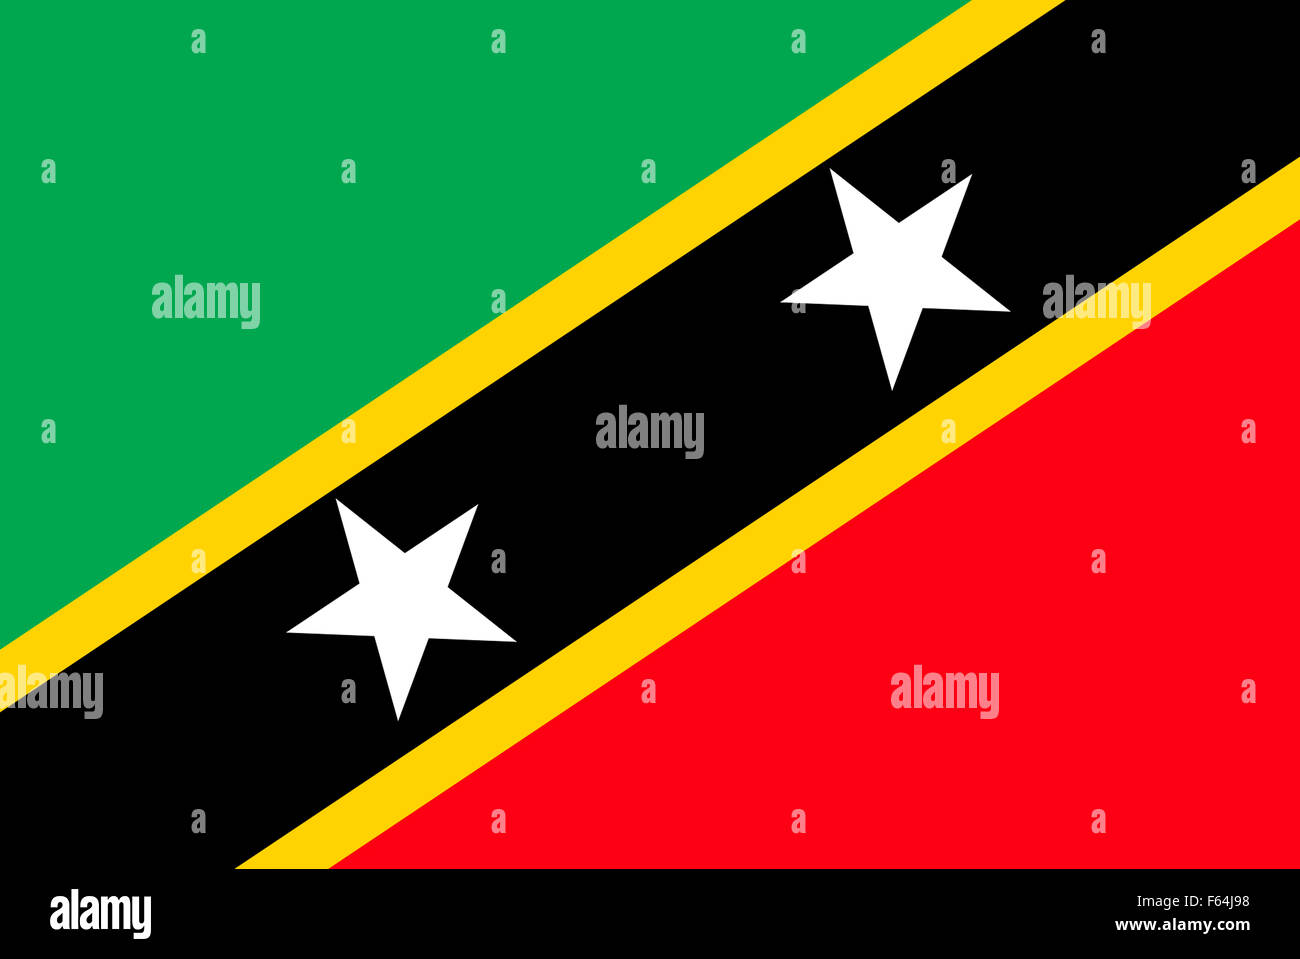 Flag of the Federation of Saint Kitts and Nevis in the Caribbean. Stock Photo